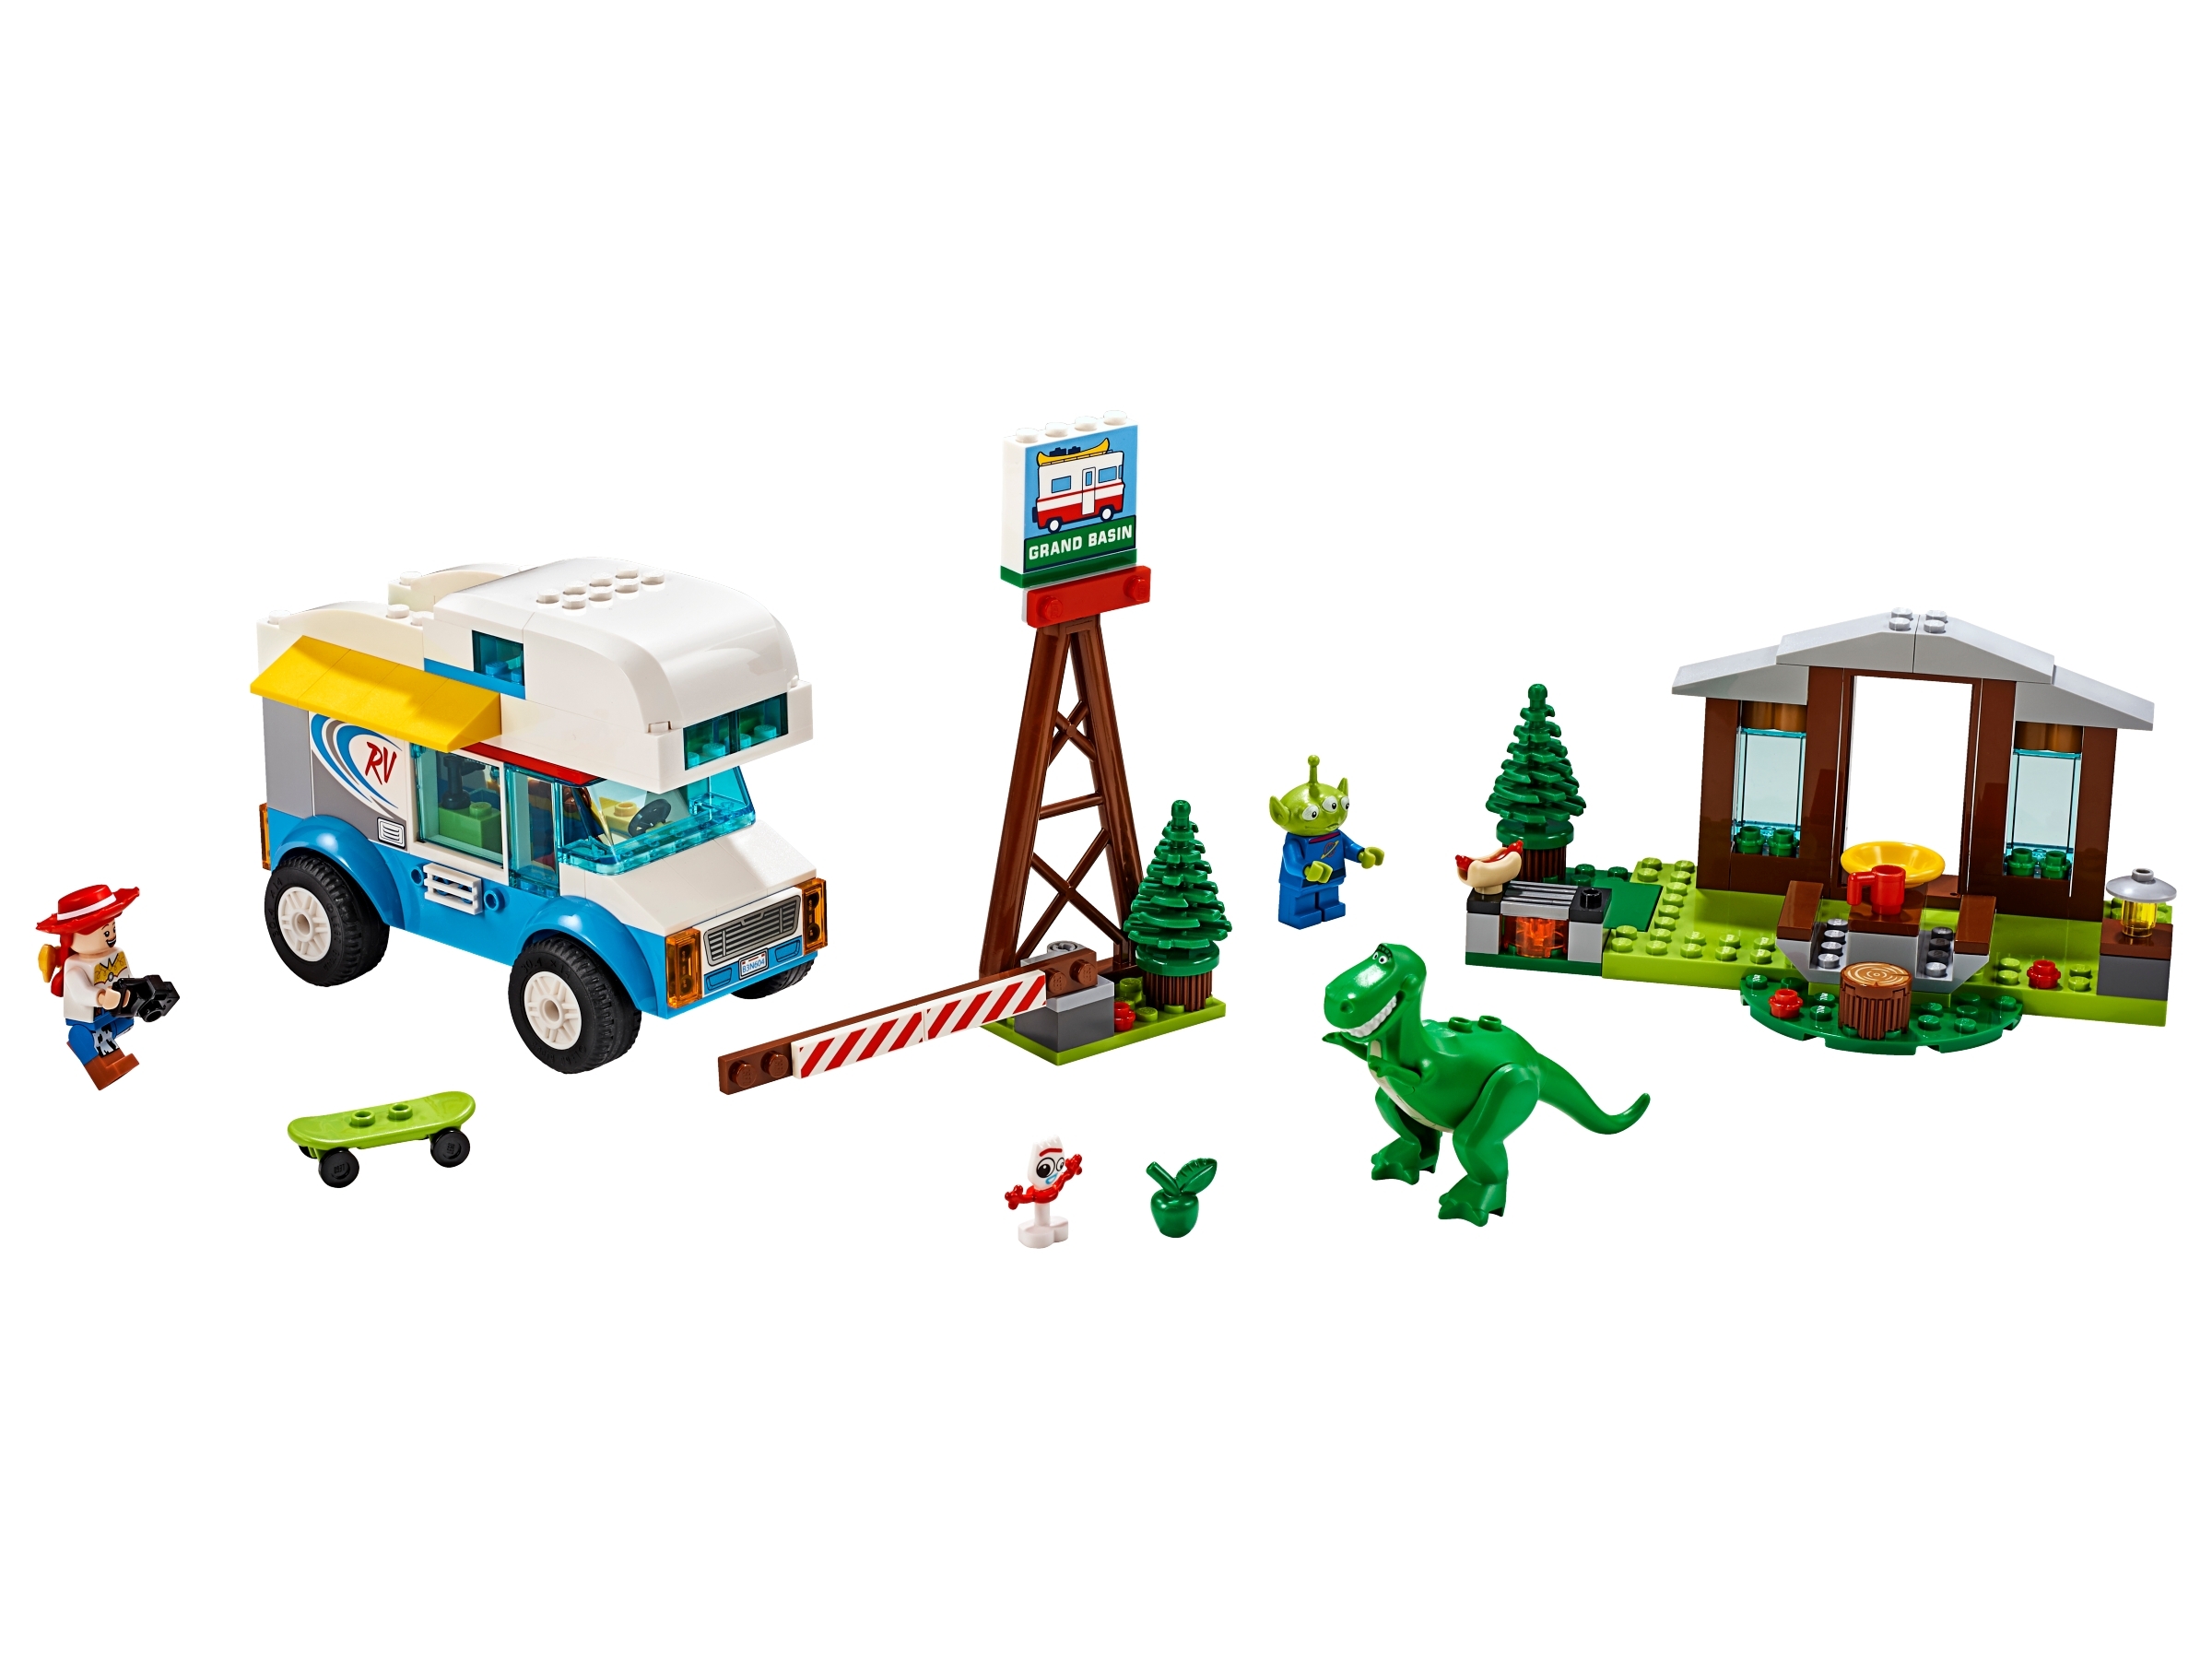 all toy story lego sets